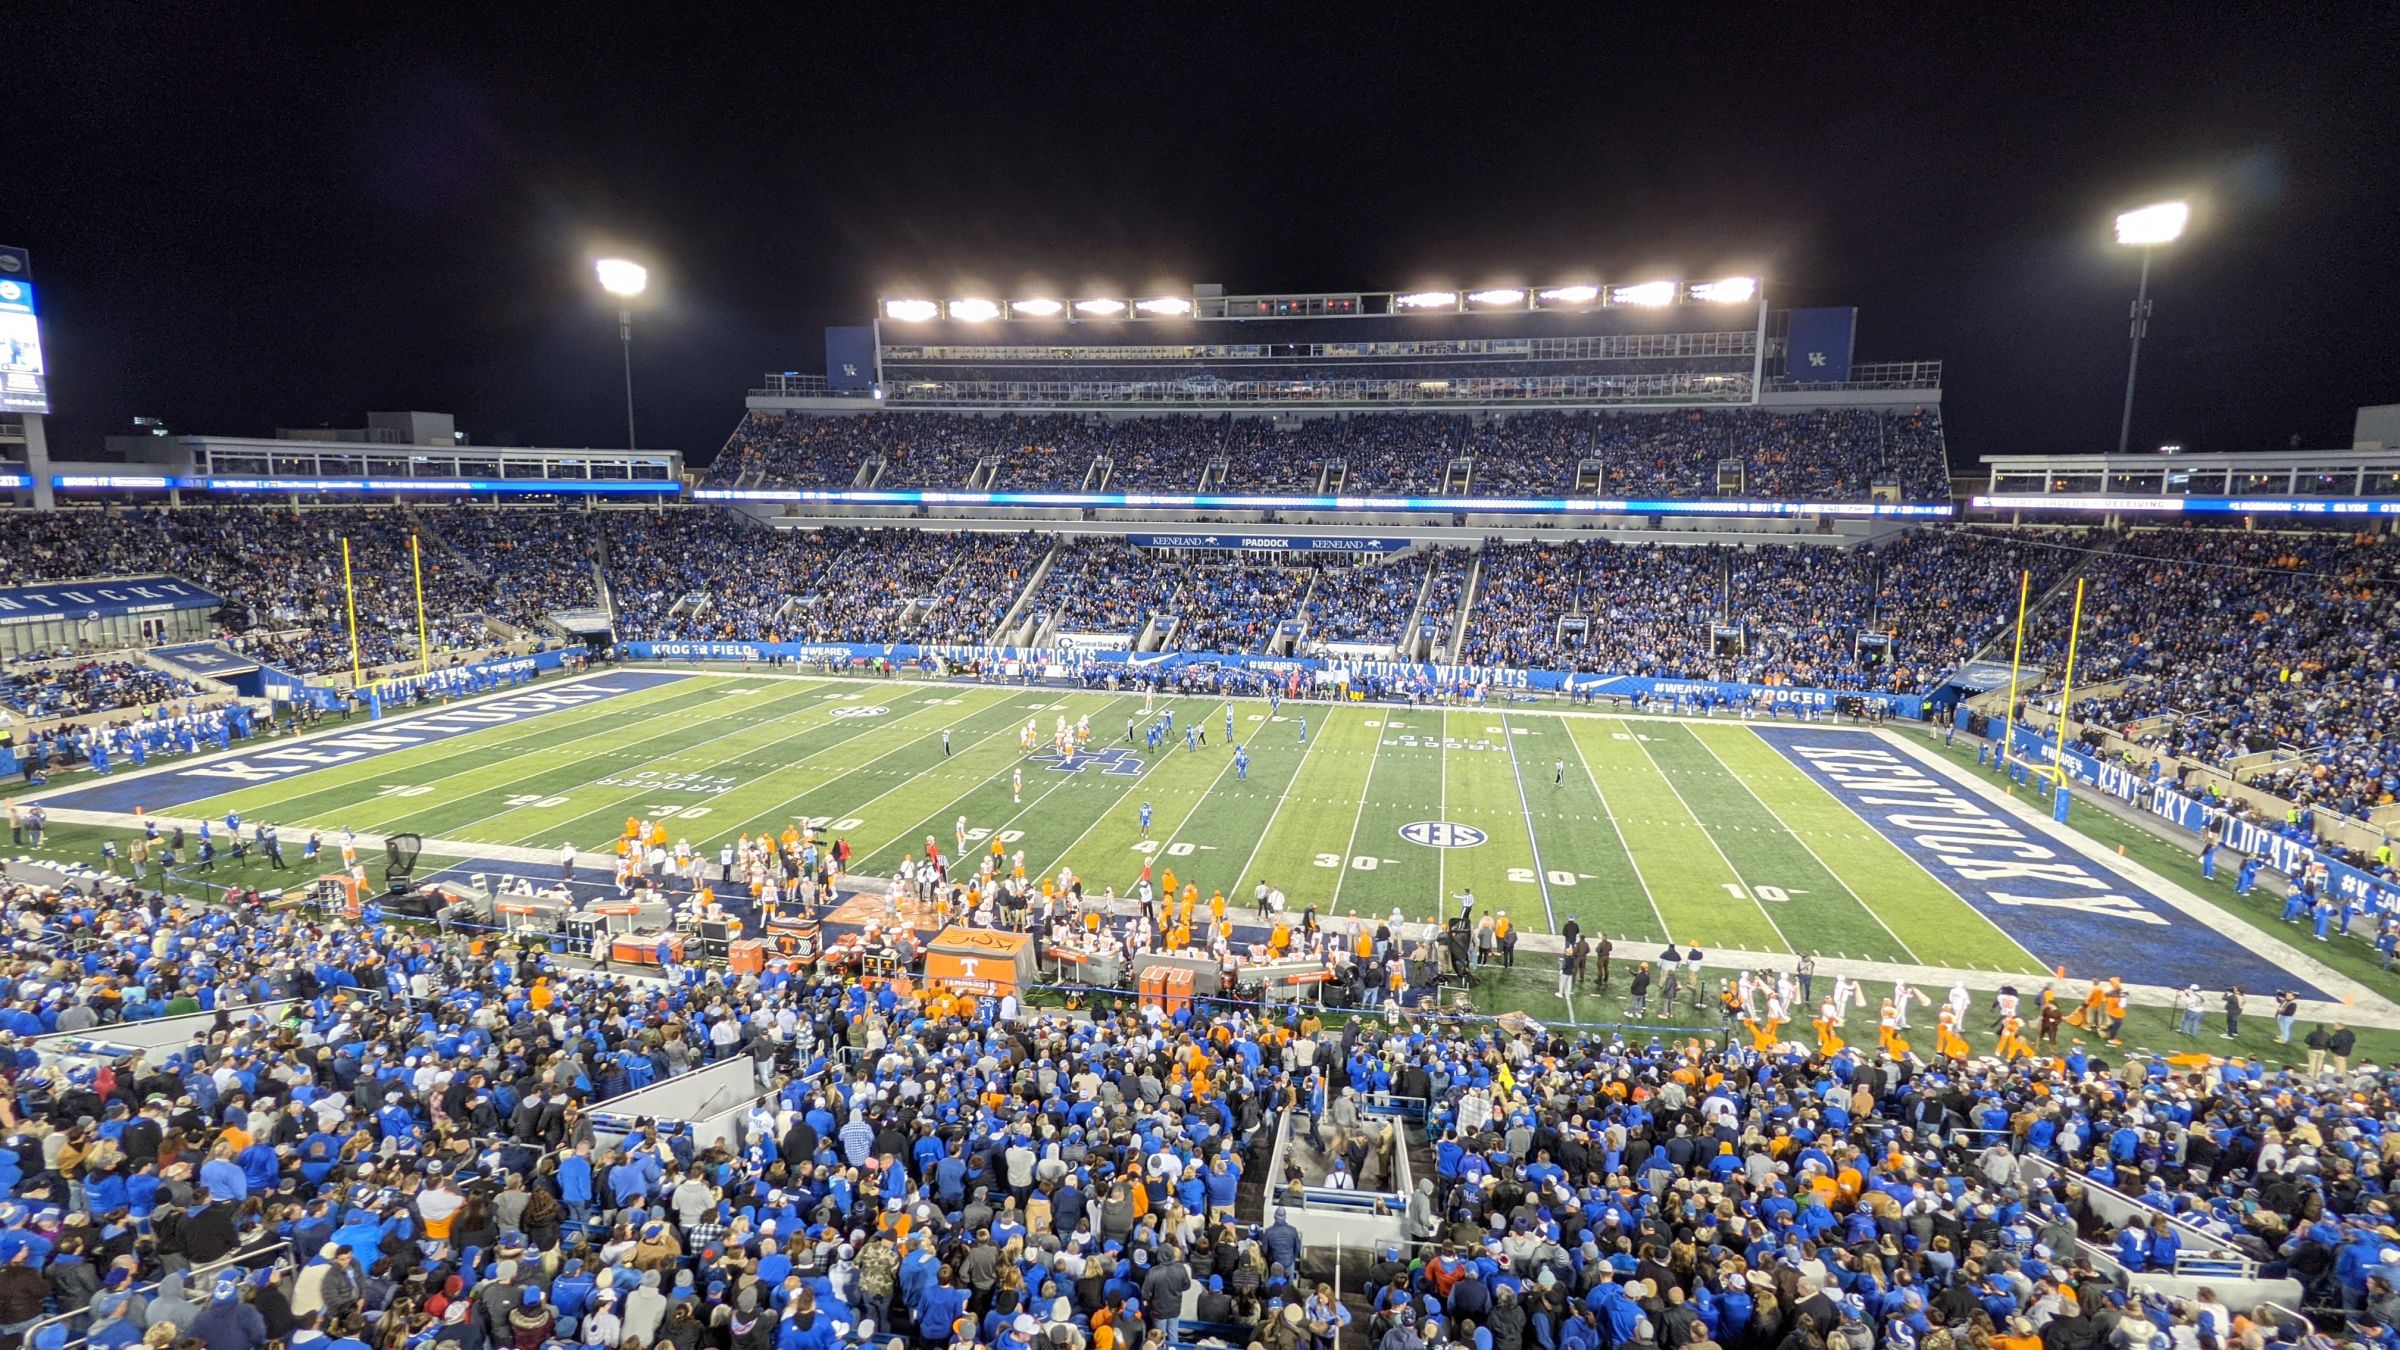 section 208, row 27 seat view  - kroger field